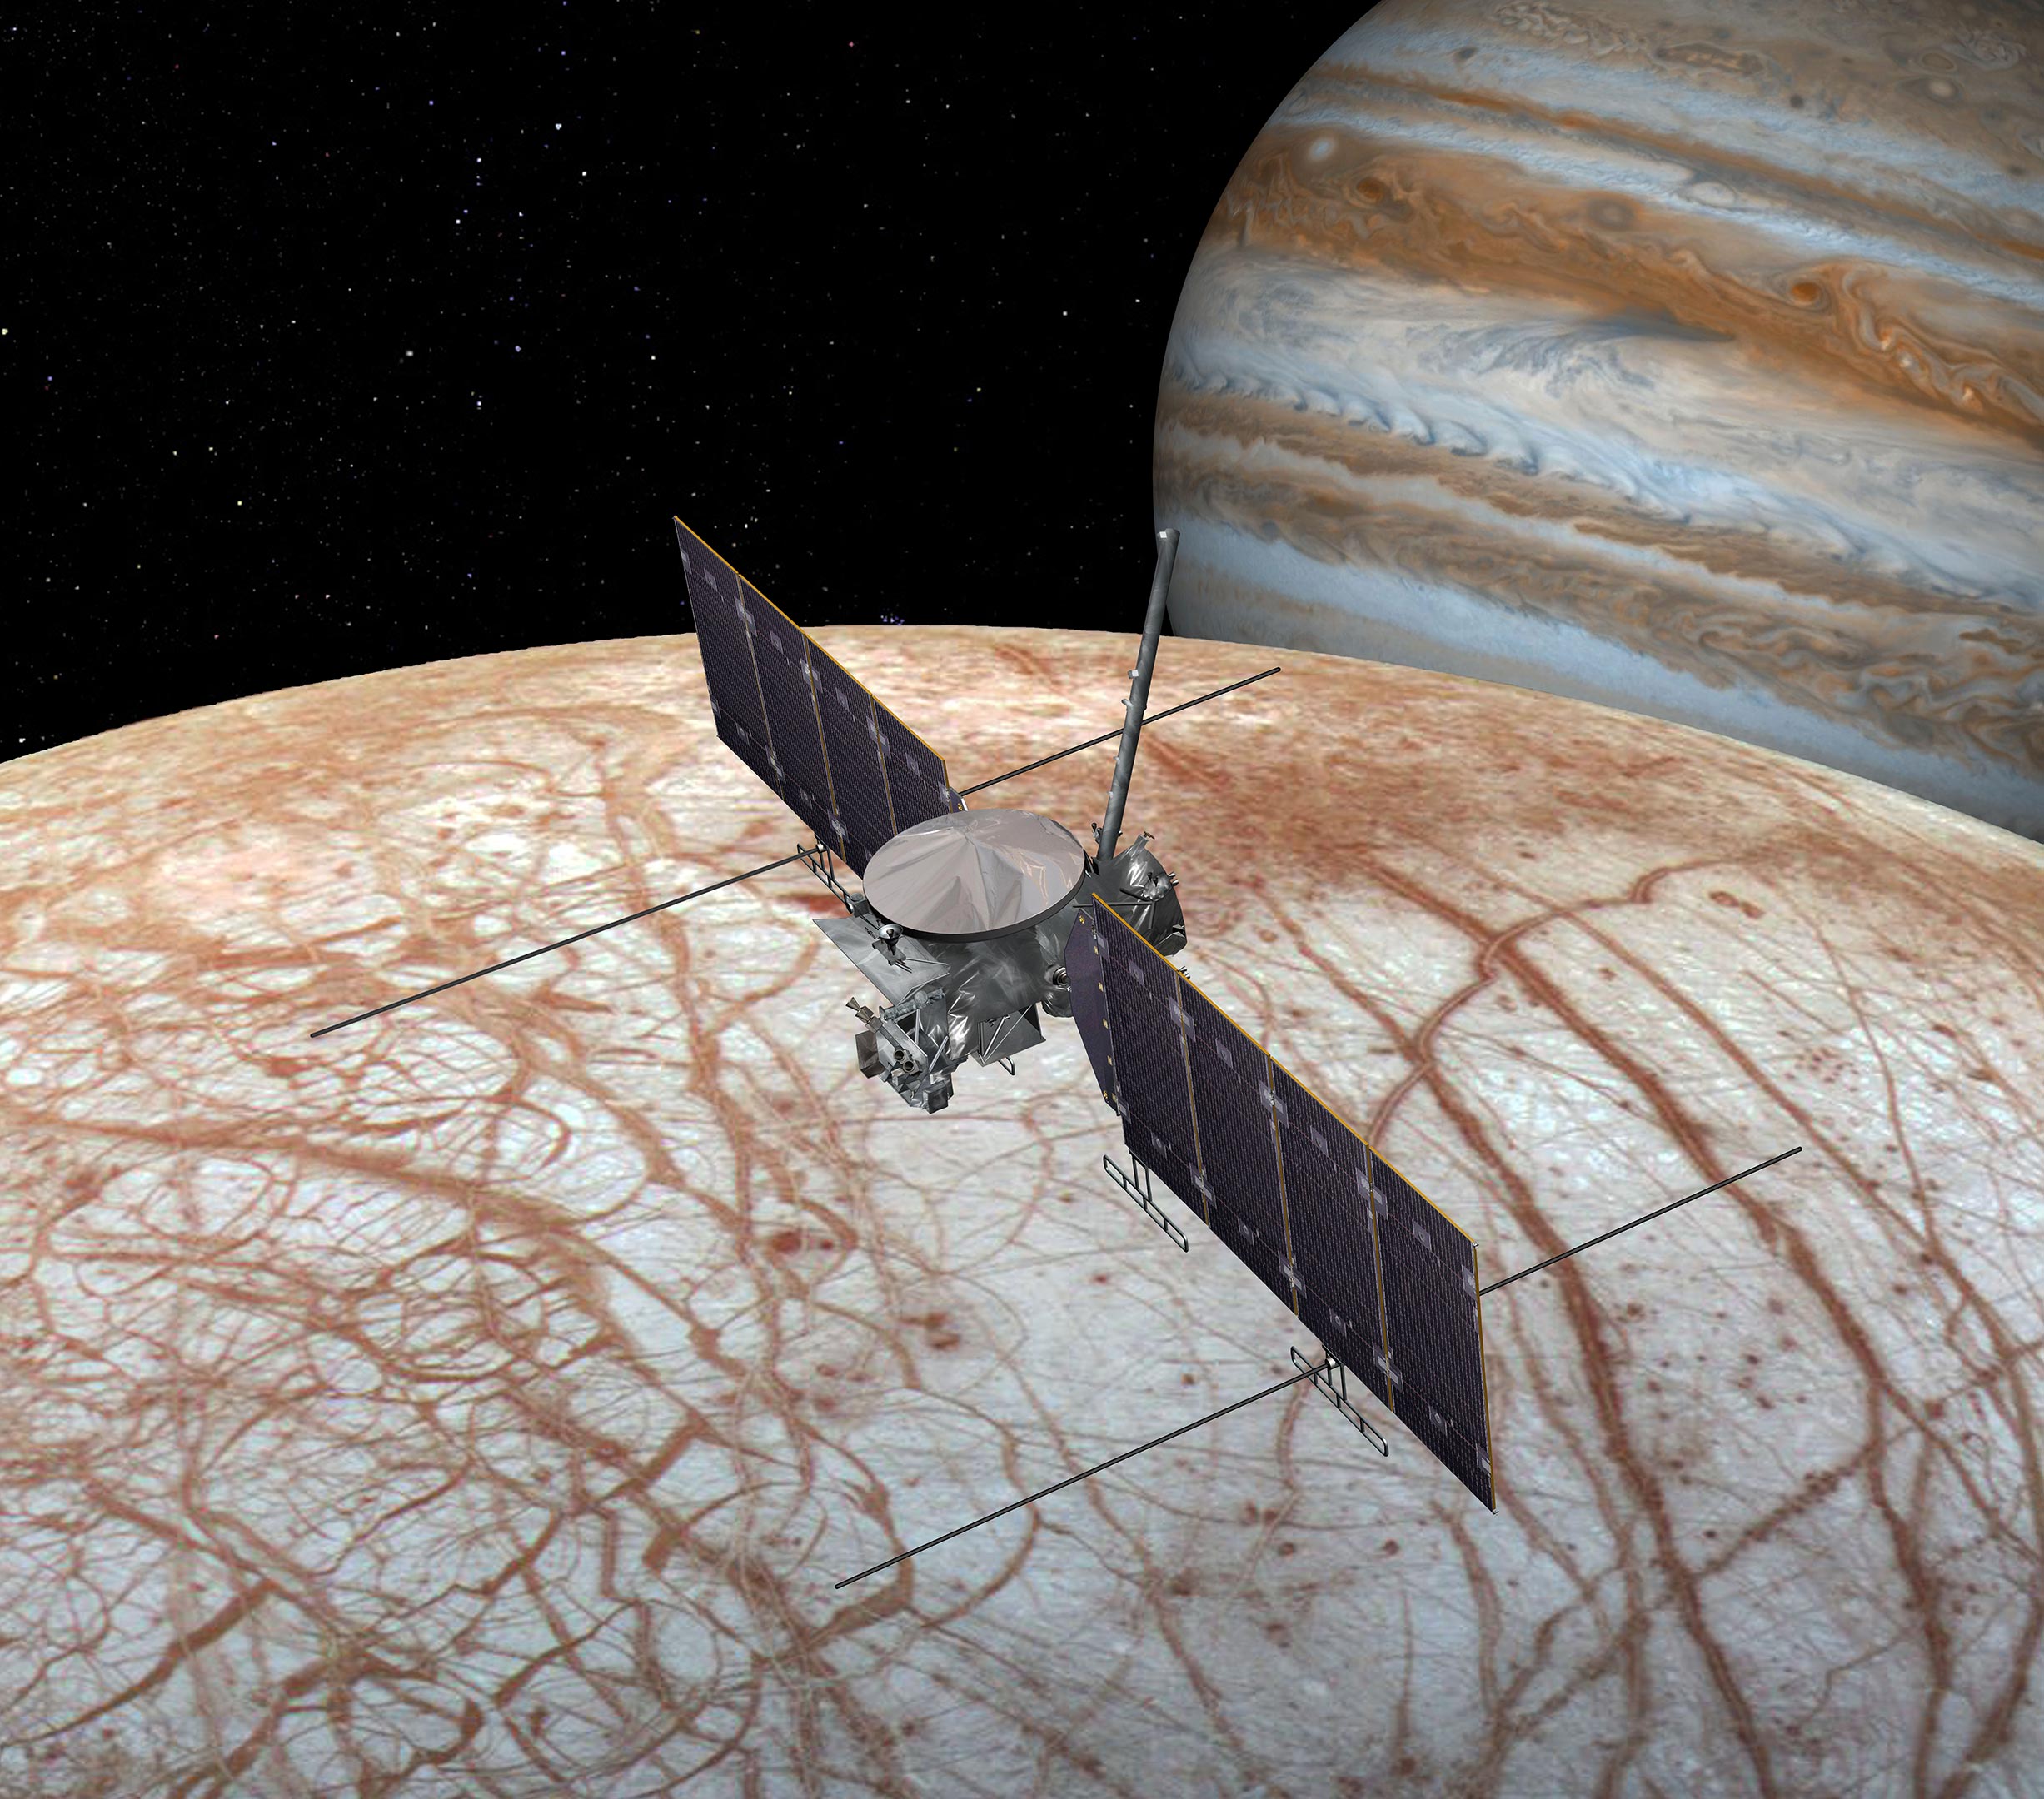 NASA Completes Main Body of Europa Clipper Spacecraft – Will Search for Life on Jupiter’s Icy Moon Europa thumbnail